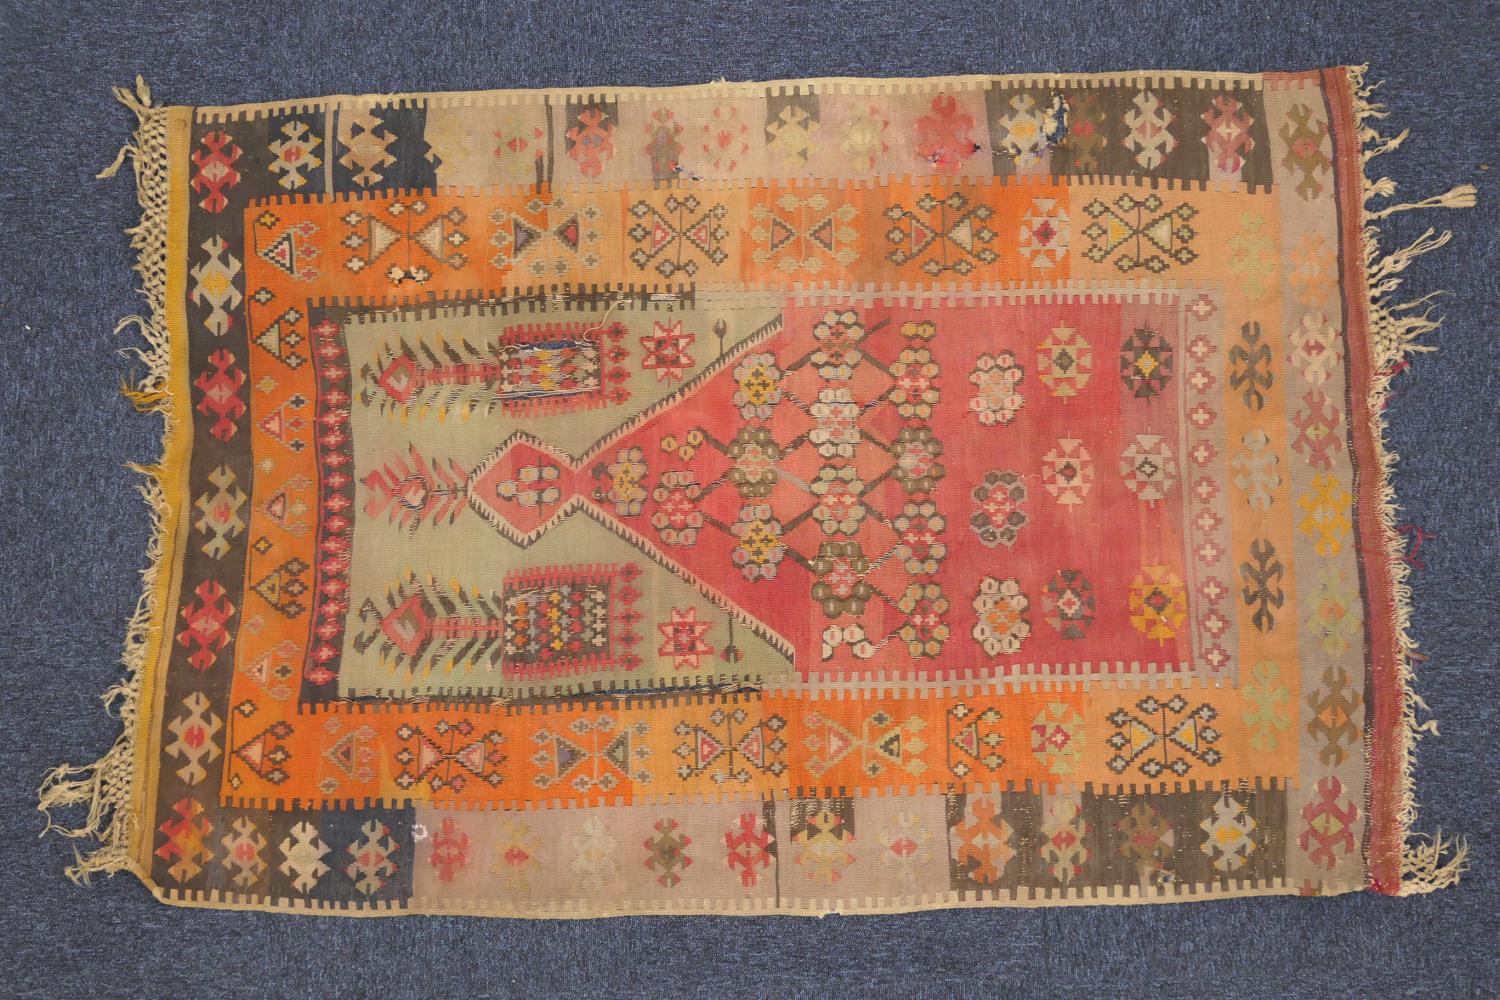 Old kilim flatweave prayer rug, circa 1900, pink and green central mihrab within geometrically